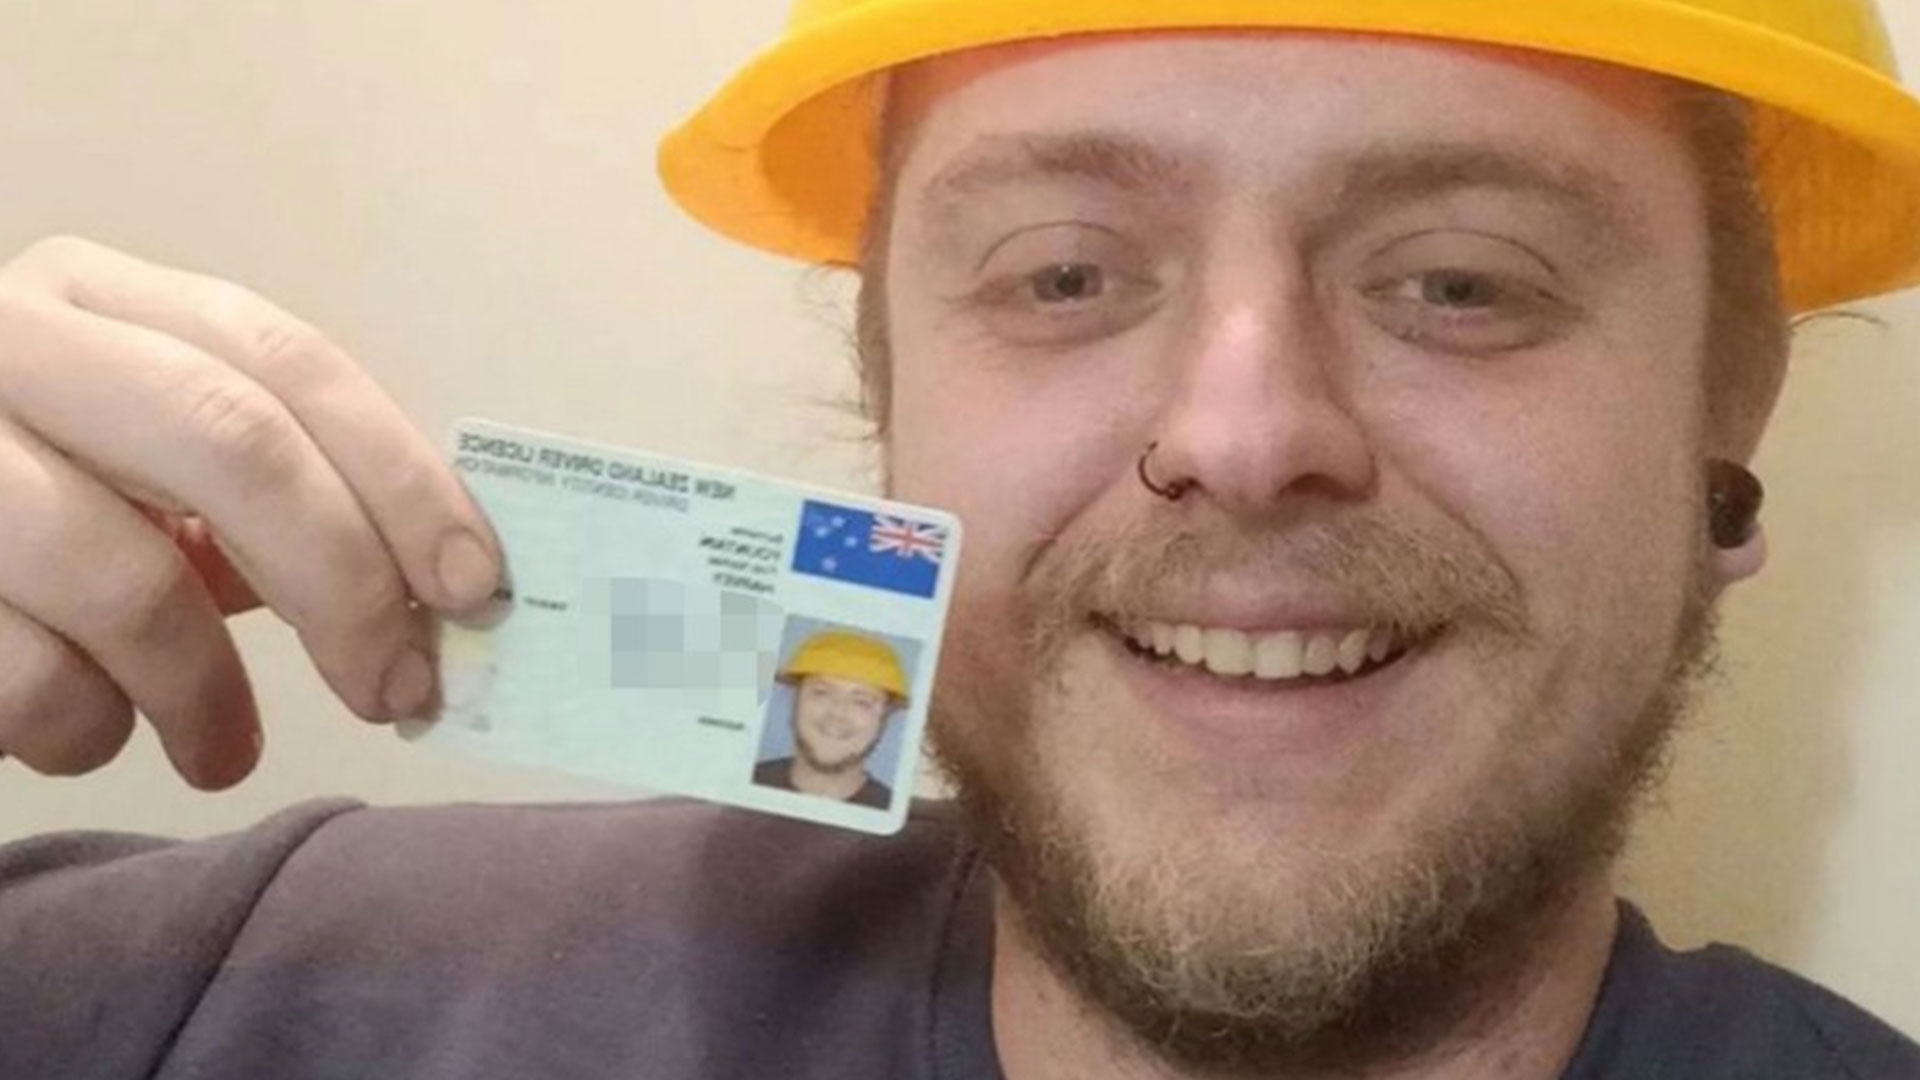 A Pasta-loving Prankster had his driving license picture taken with a colander placed on his head